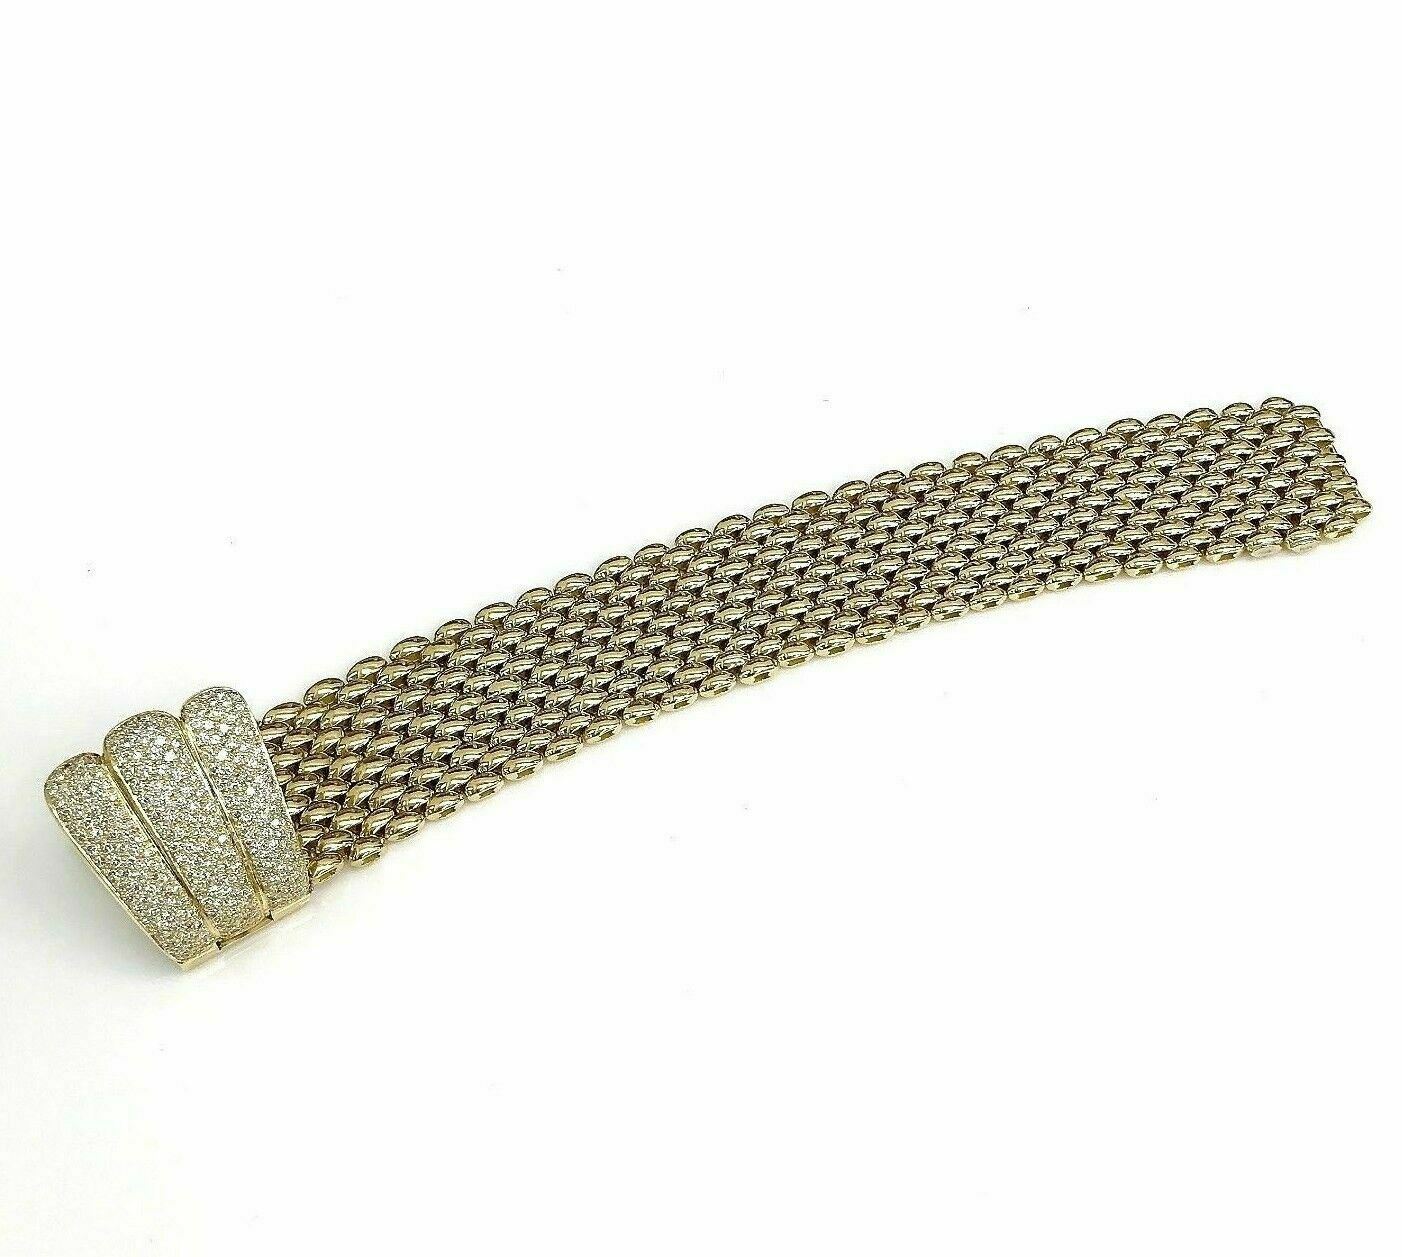 1980's 3.20 Carats Diamond Clamshell Bracelet Solid 18K Gold 3.45 OZ 1 Inch Wide